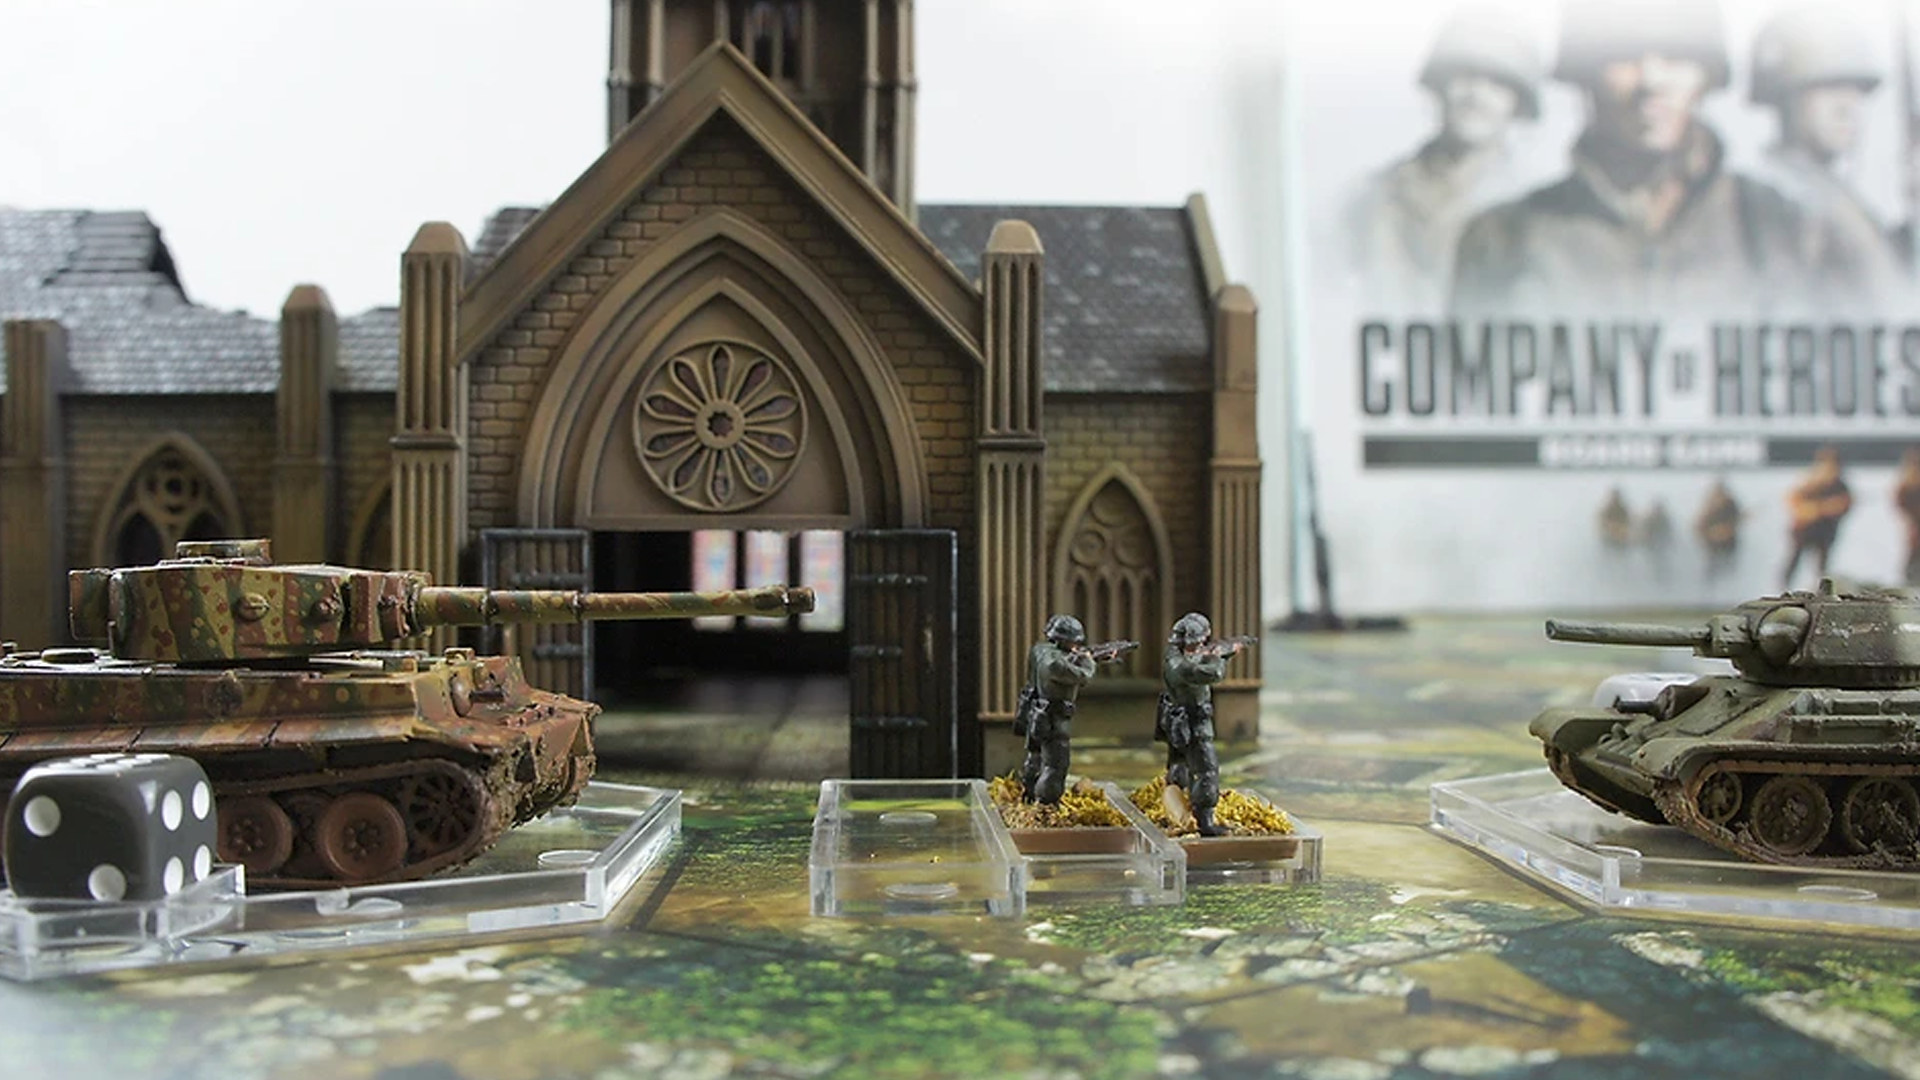 Image for Company of Heroes board game co-designer passes away